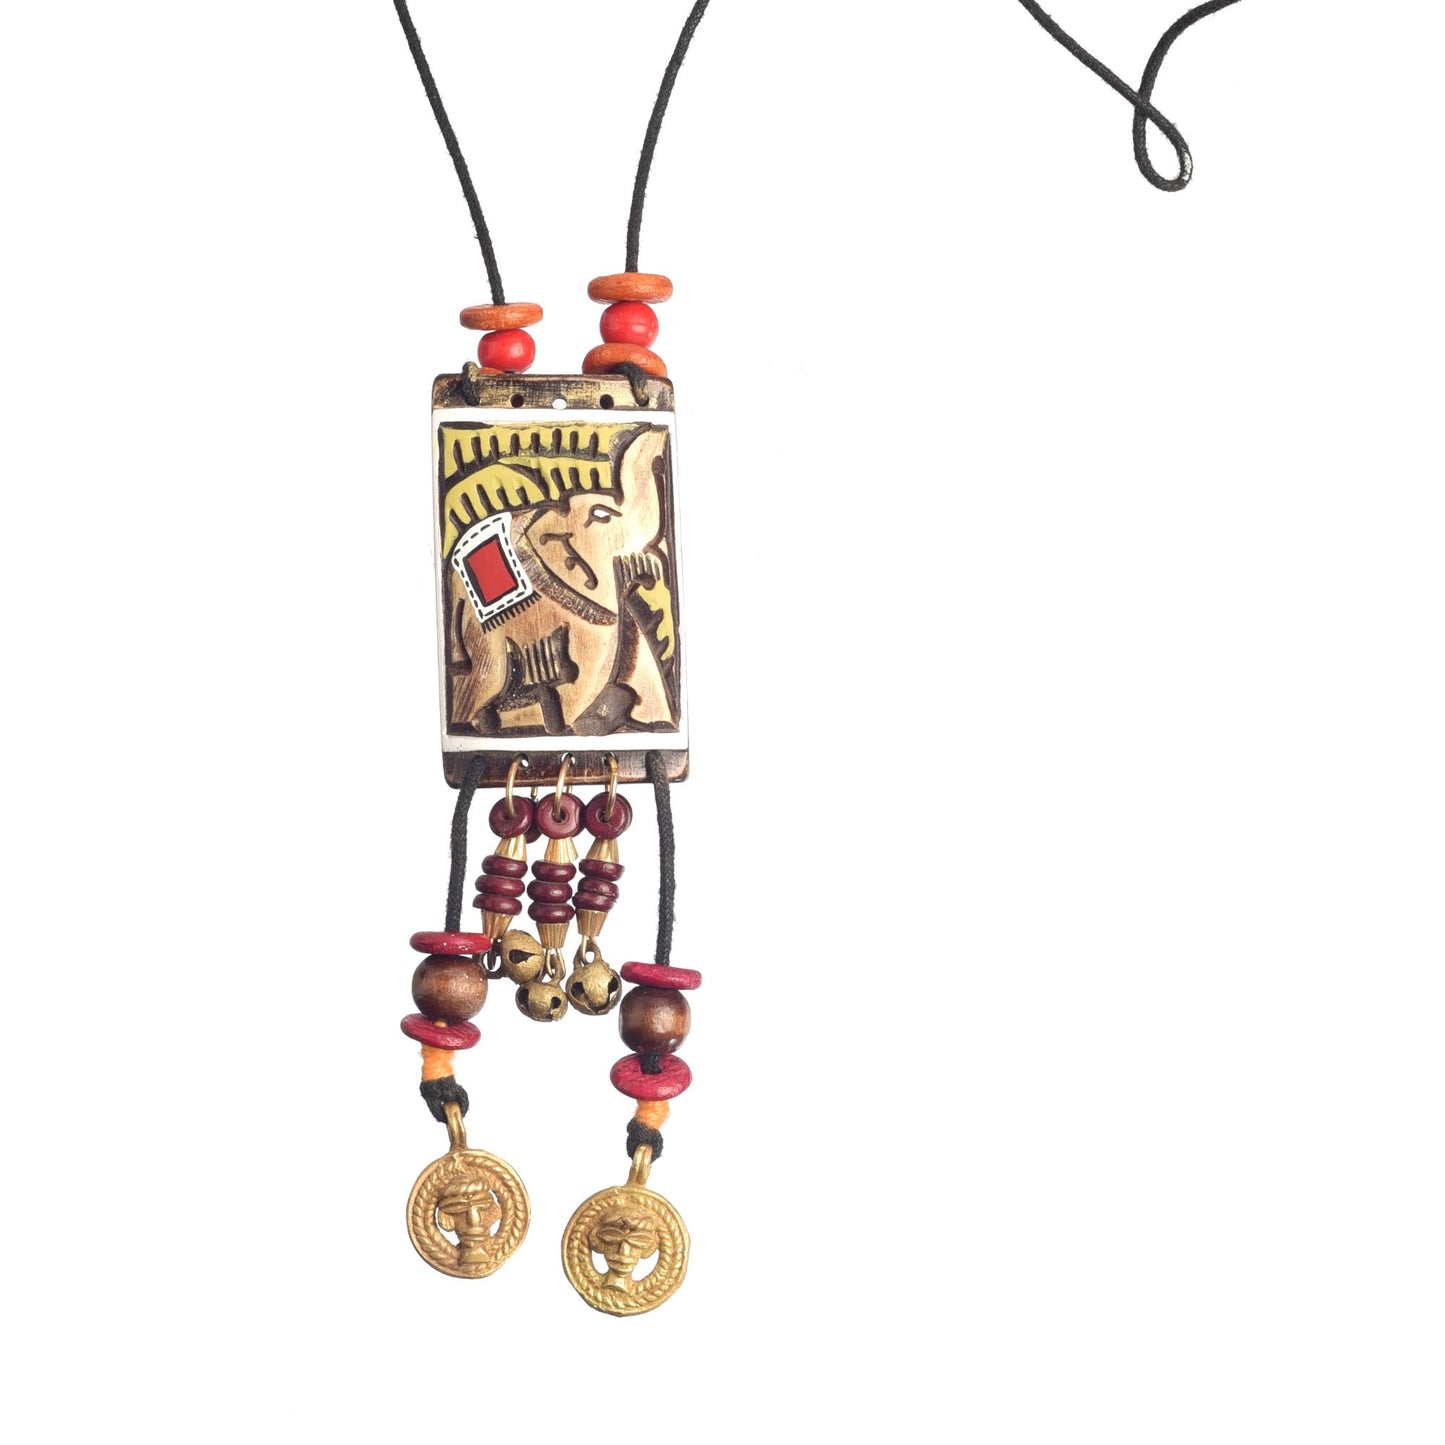 The Queen Vertical Handcrafted Tribal Necklace